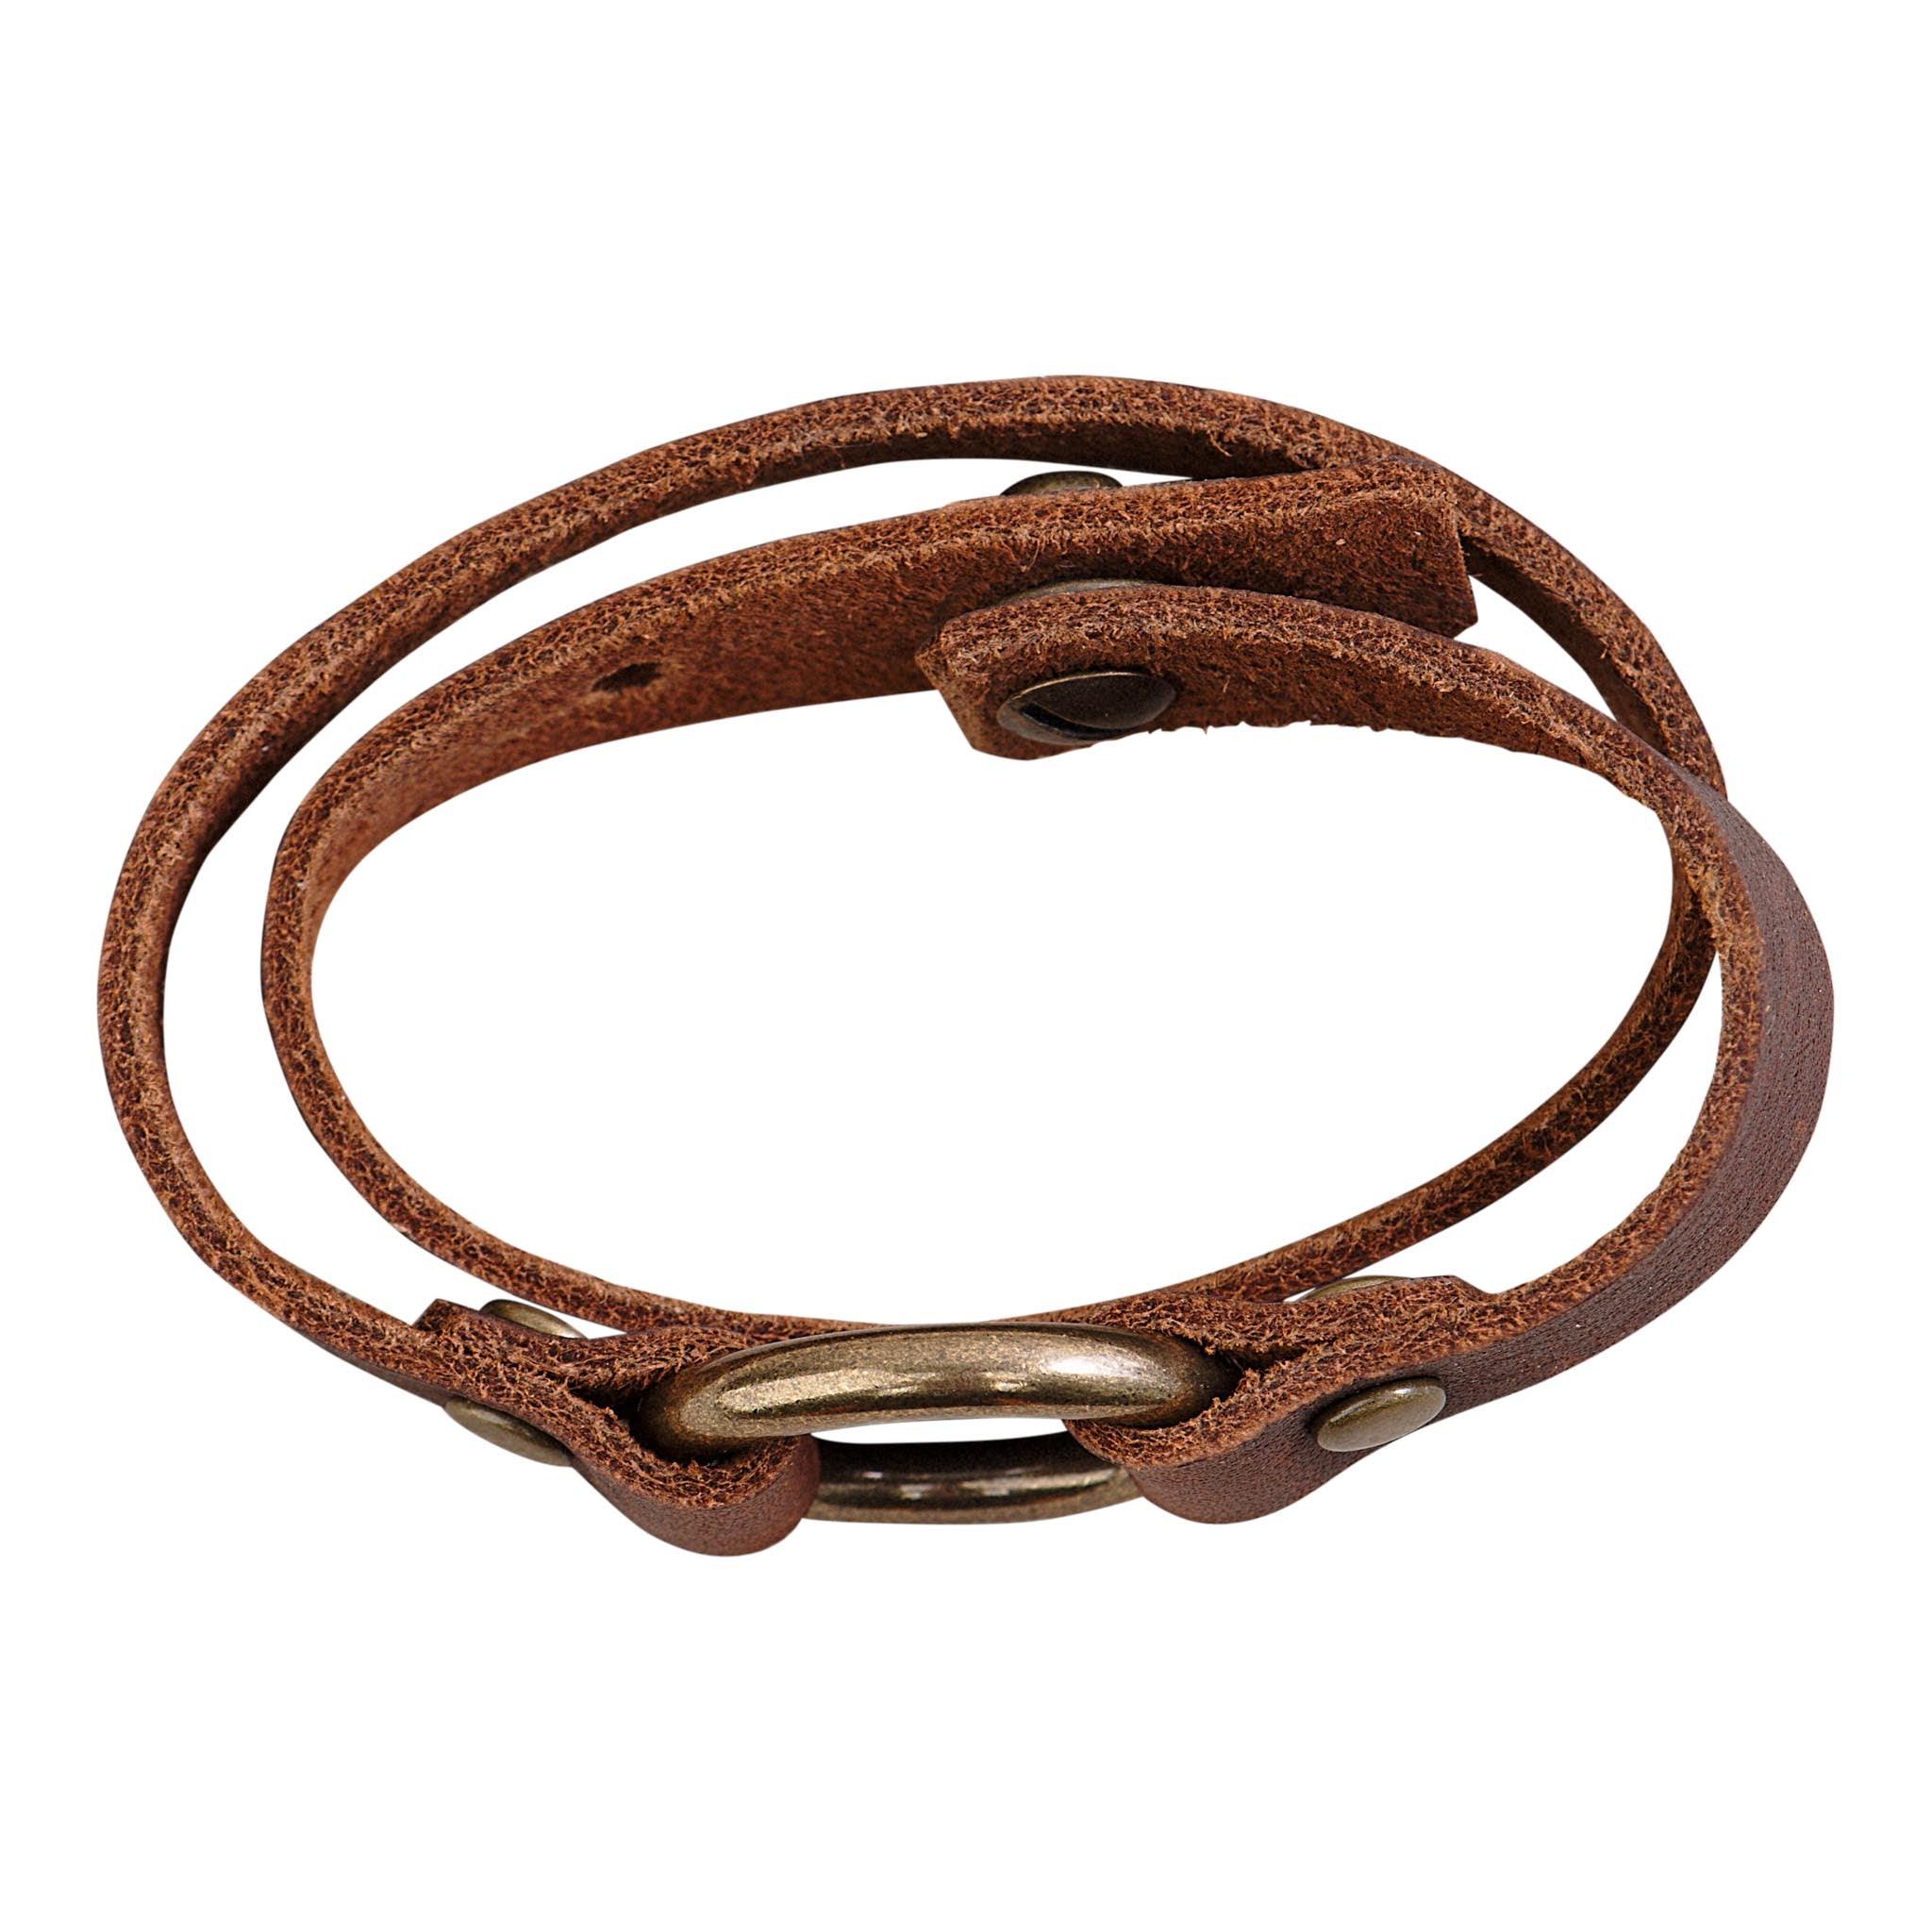 Catch Double Wrap Leather Bracelet with Matte Stainless Steel Brummels –  Sailormadeusa